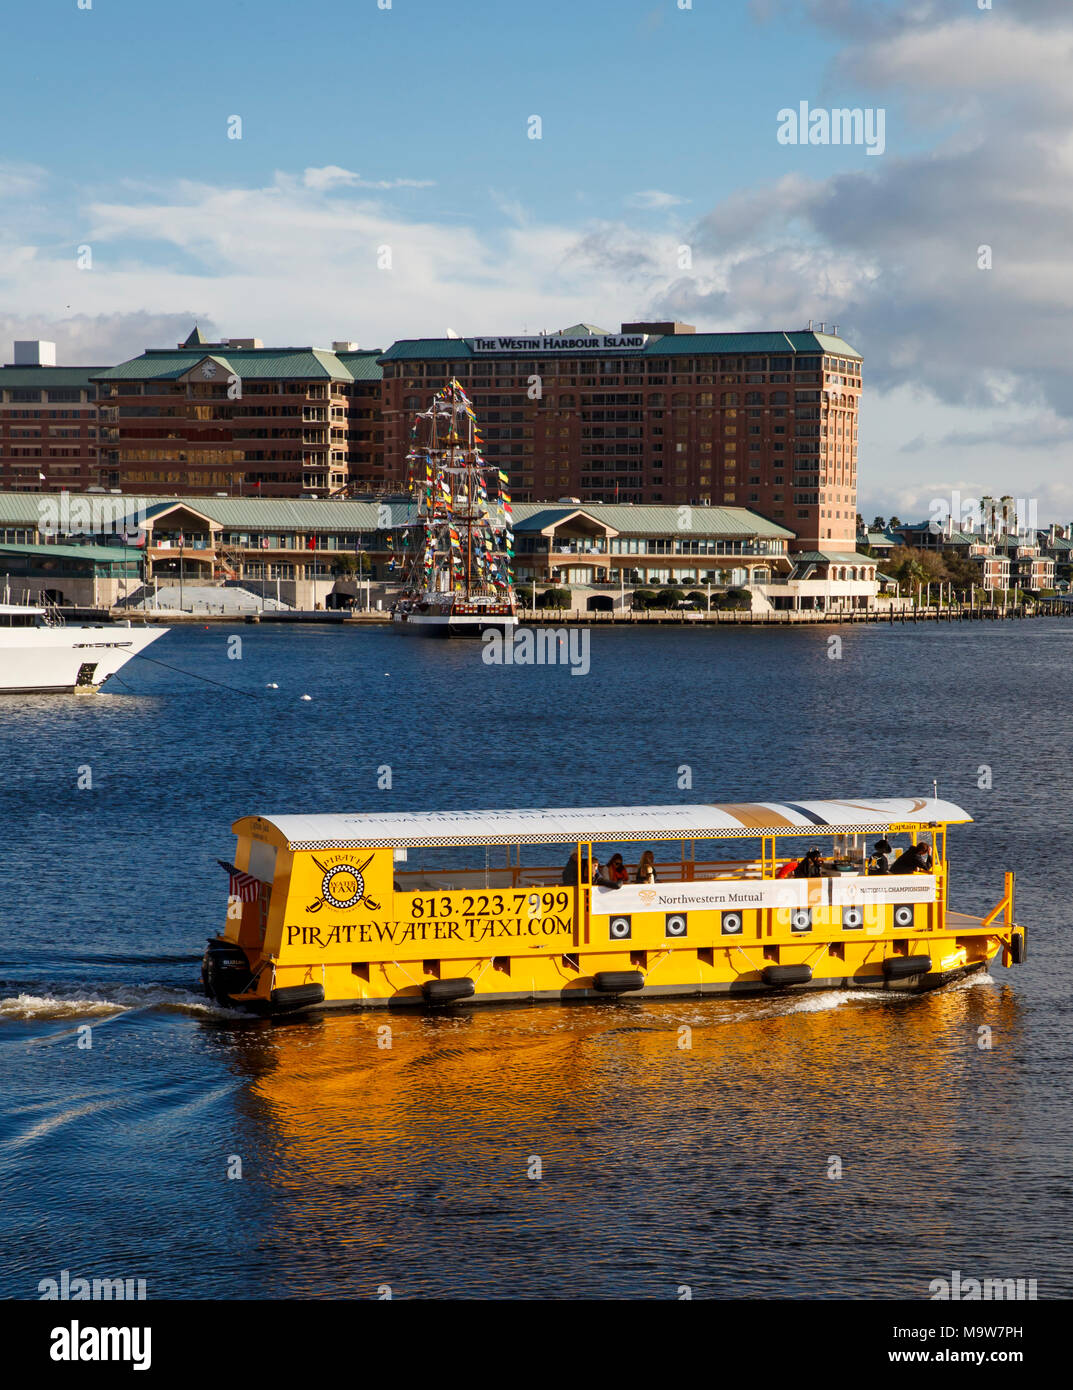 The Pirate Water Taxi navigates the Hillsborough River in front of the Tampa Convention Center during the 2017 College Football Playoff in Tampa, Flor Stock Photo